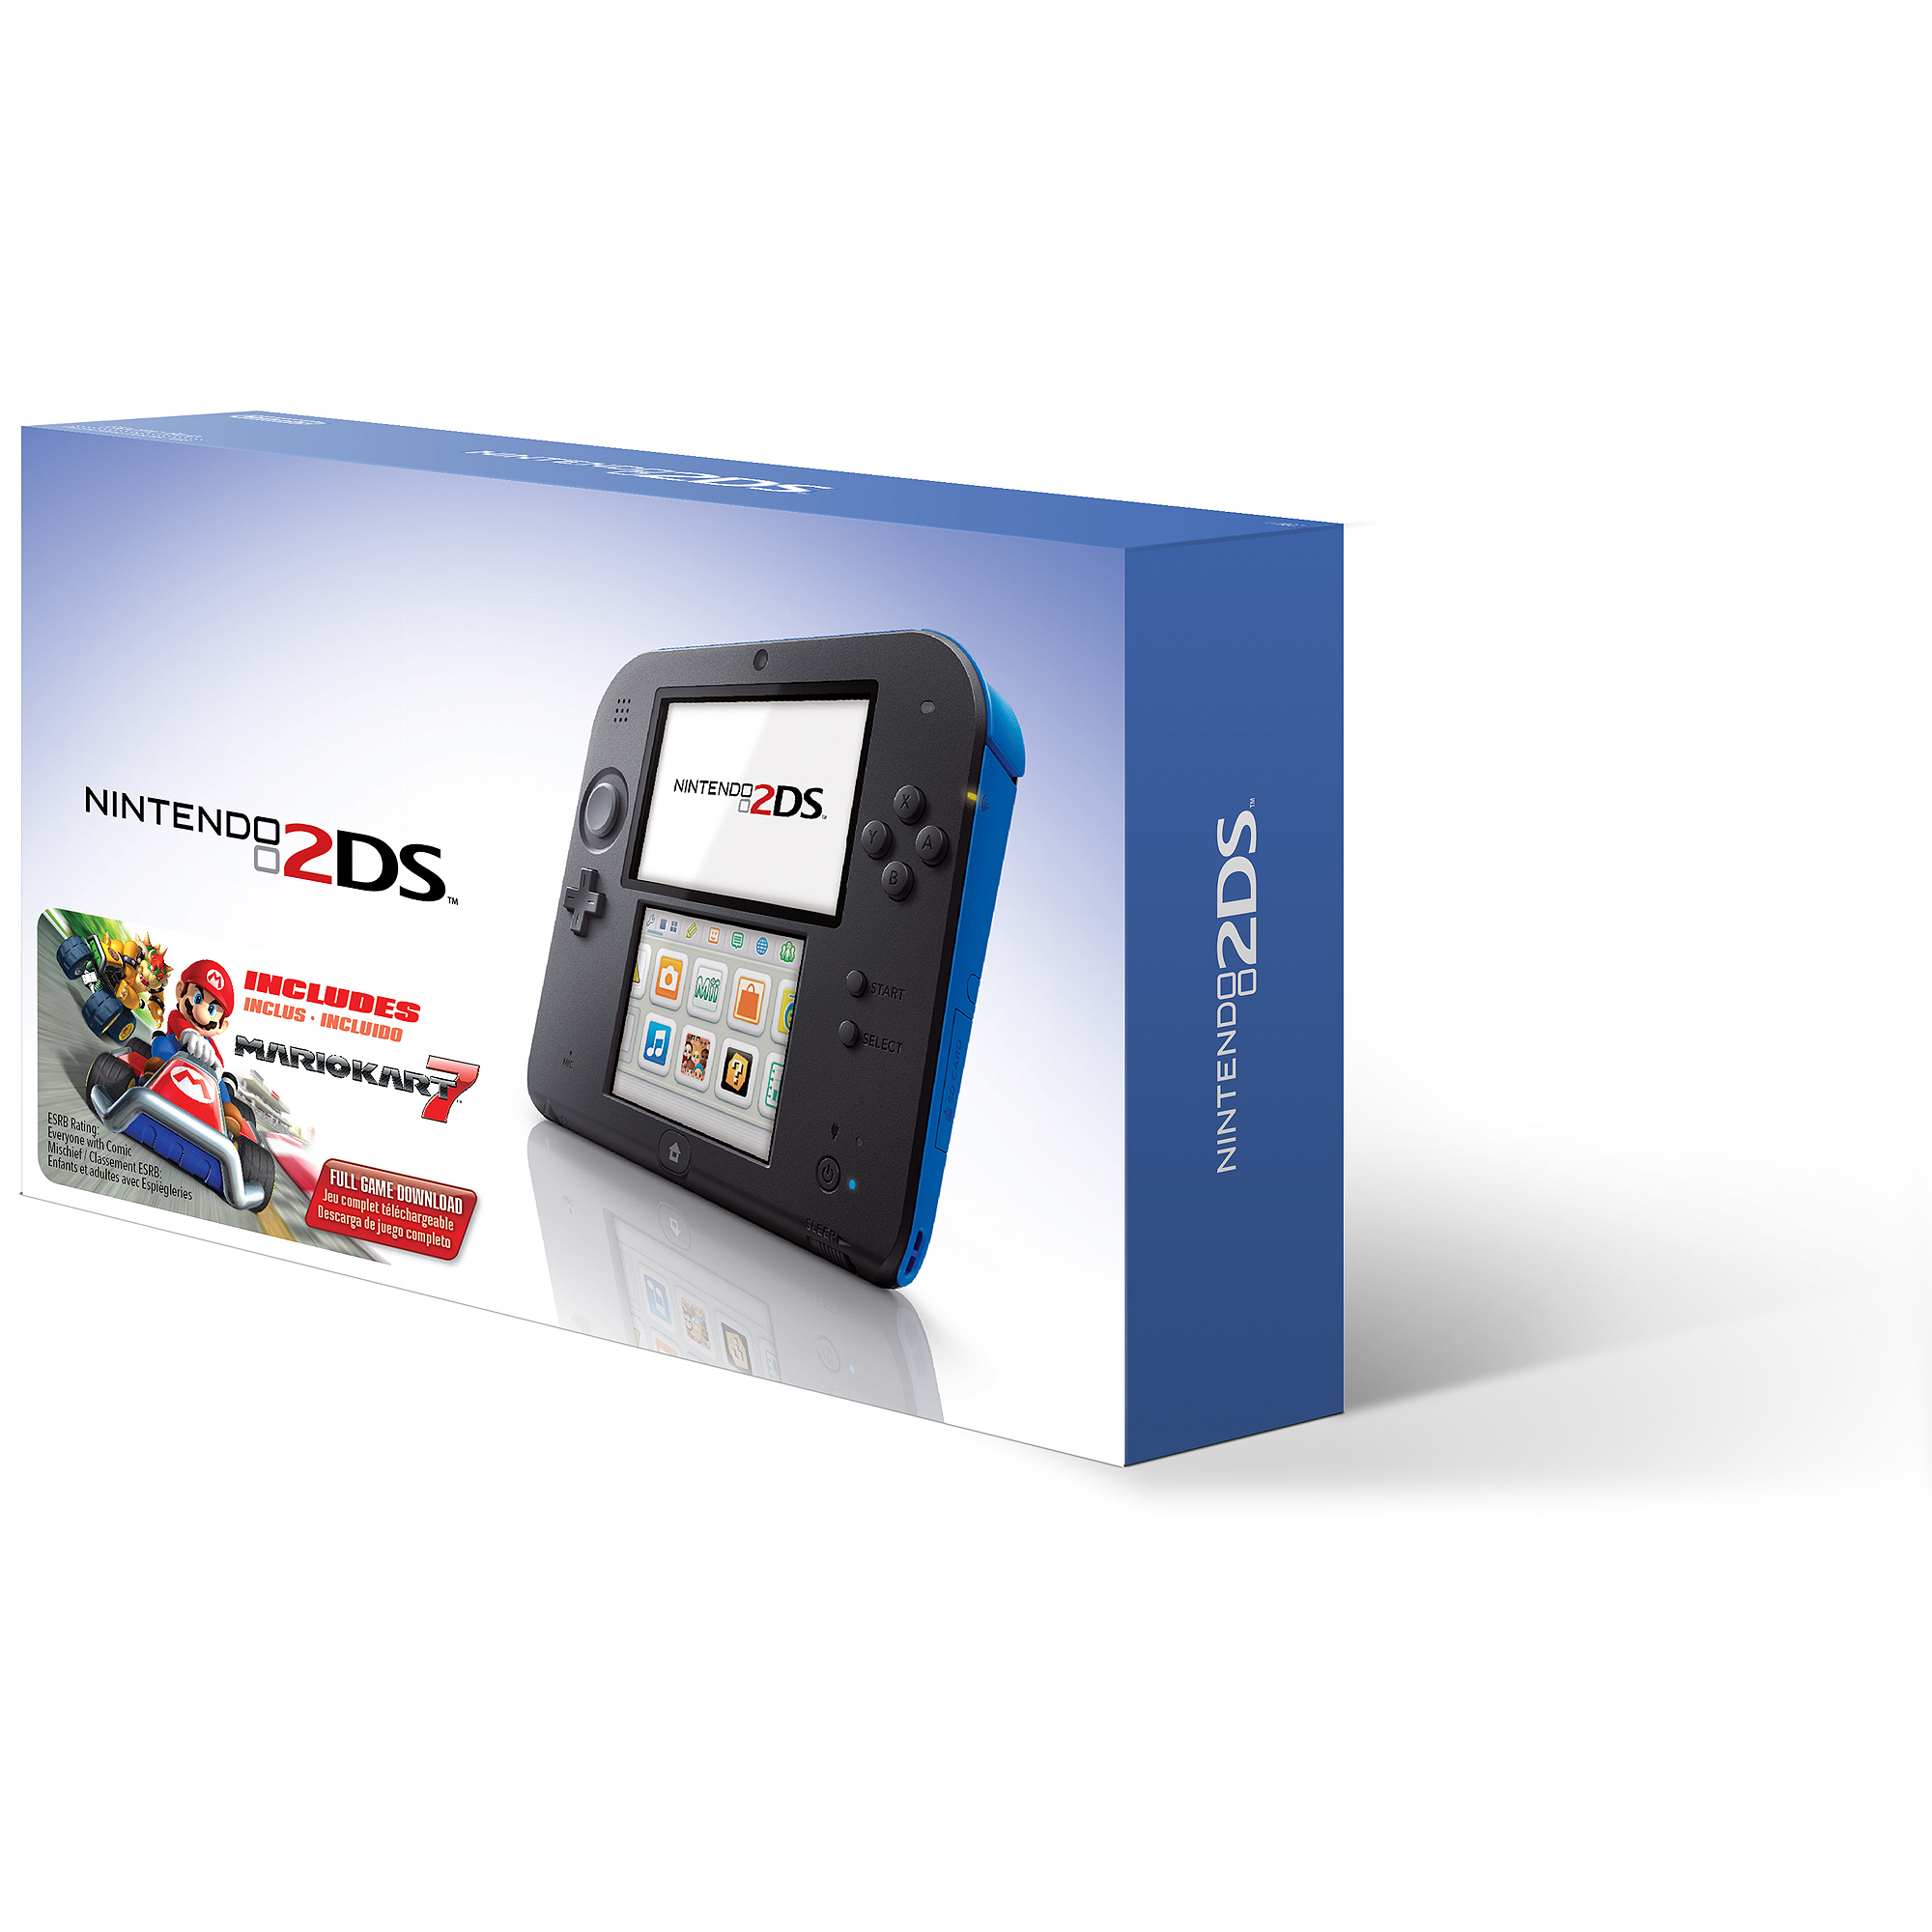 Nintendo 2DS with Mario Kart 7 Game, Electric Blue - image 1 of 2